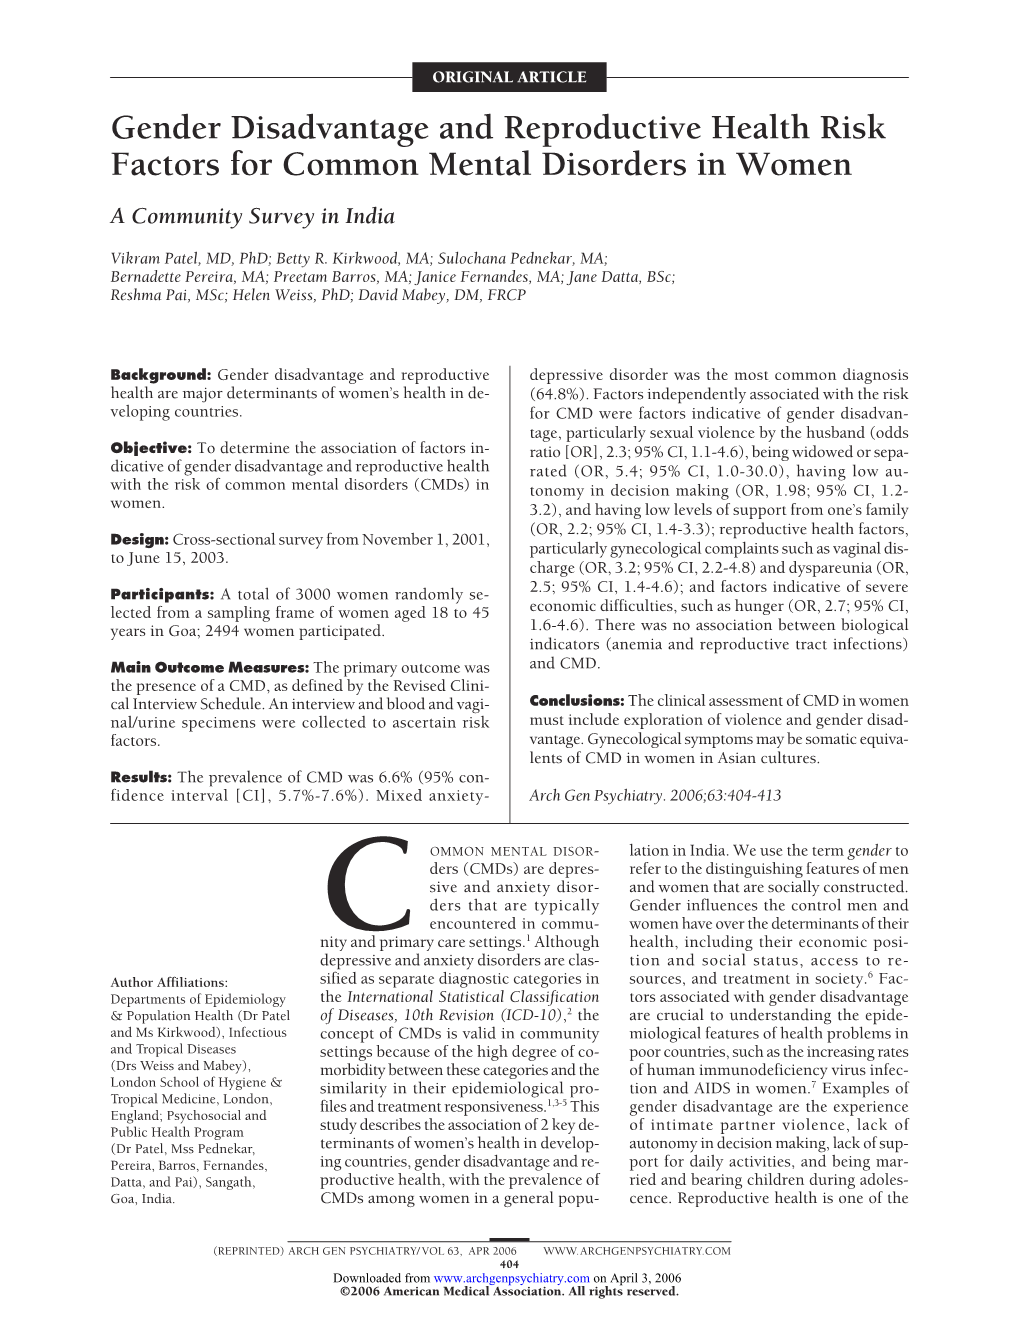 Gender Disadvantage and Reproductive Health Risk Factors for Common Mental Disorders in Women a Community Survey in India